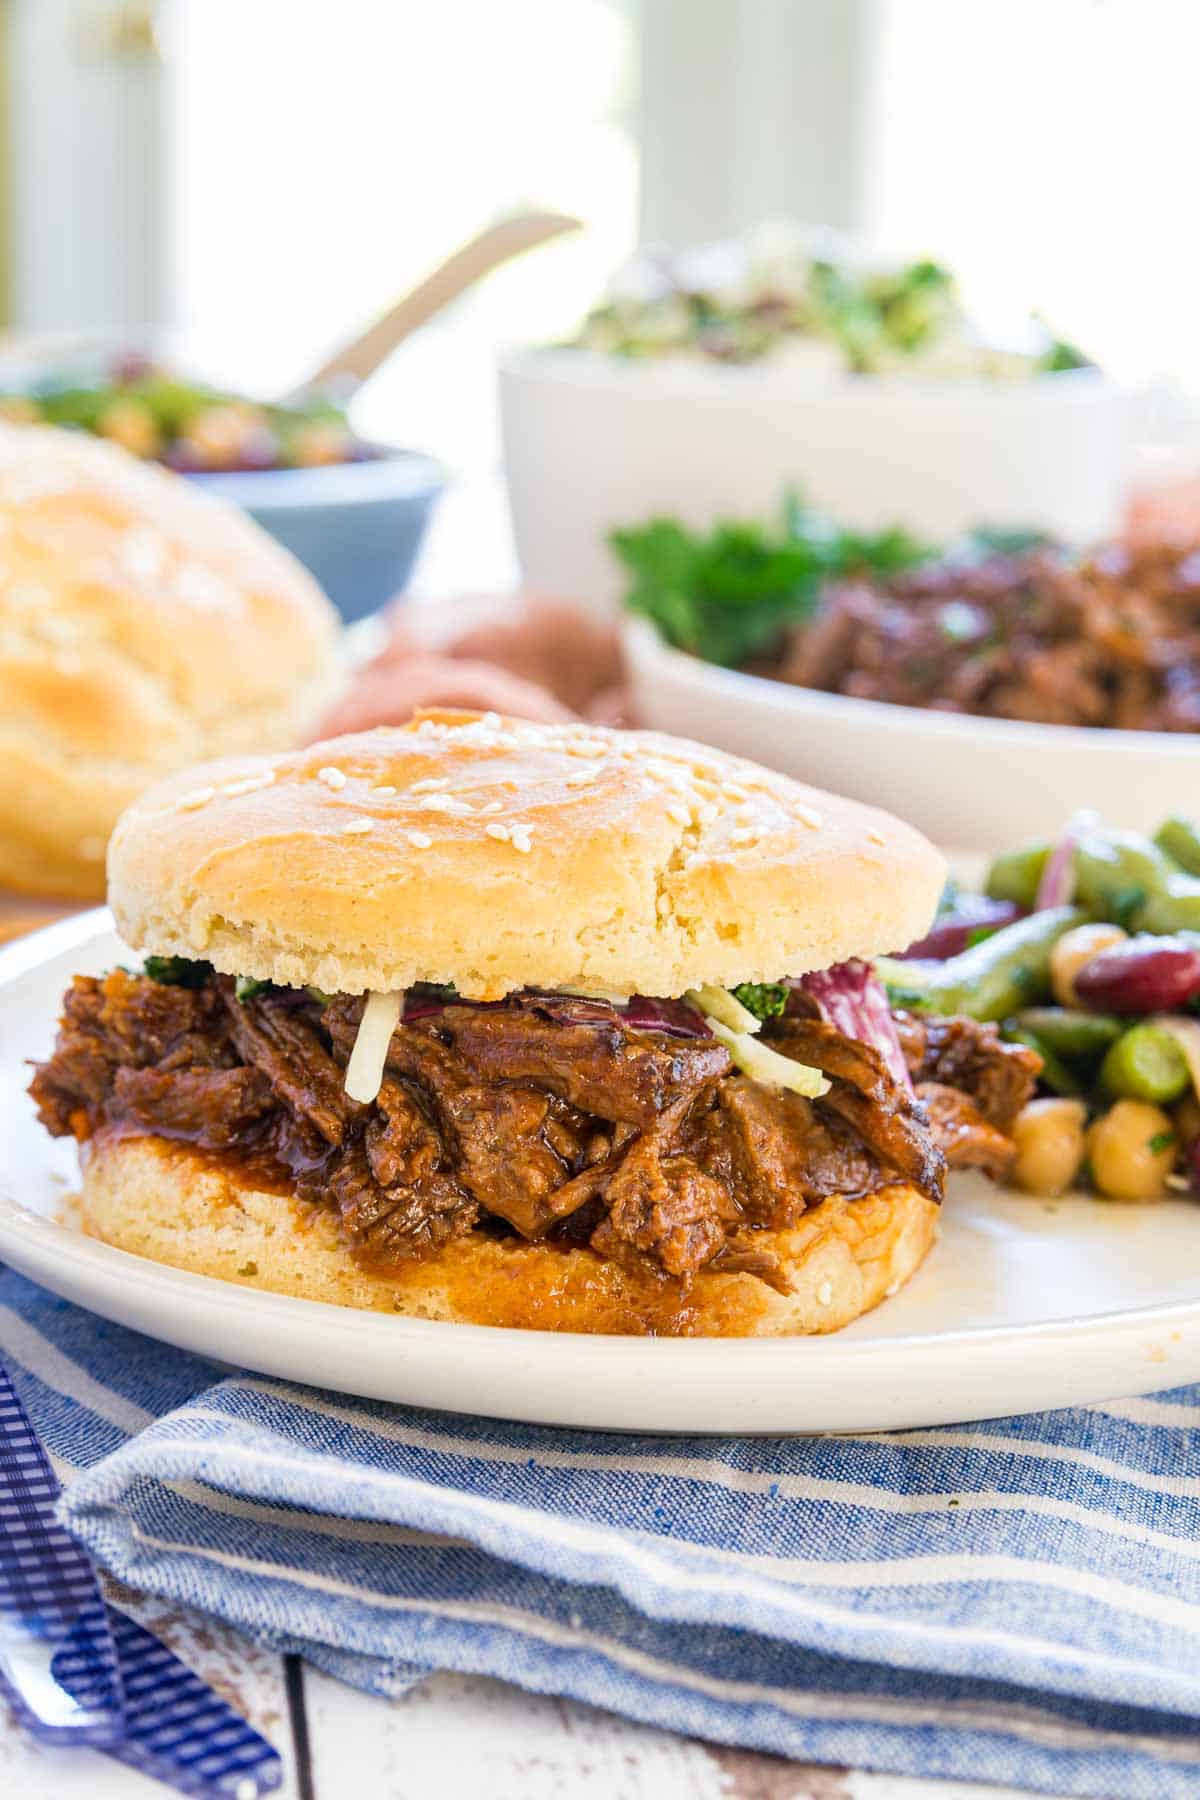 A Crockpot barbecue beef sandwich served on a plate with three bean salad.